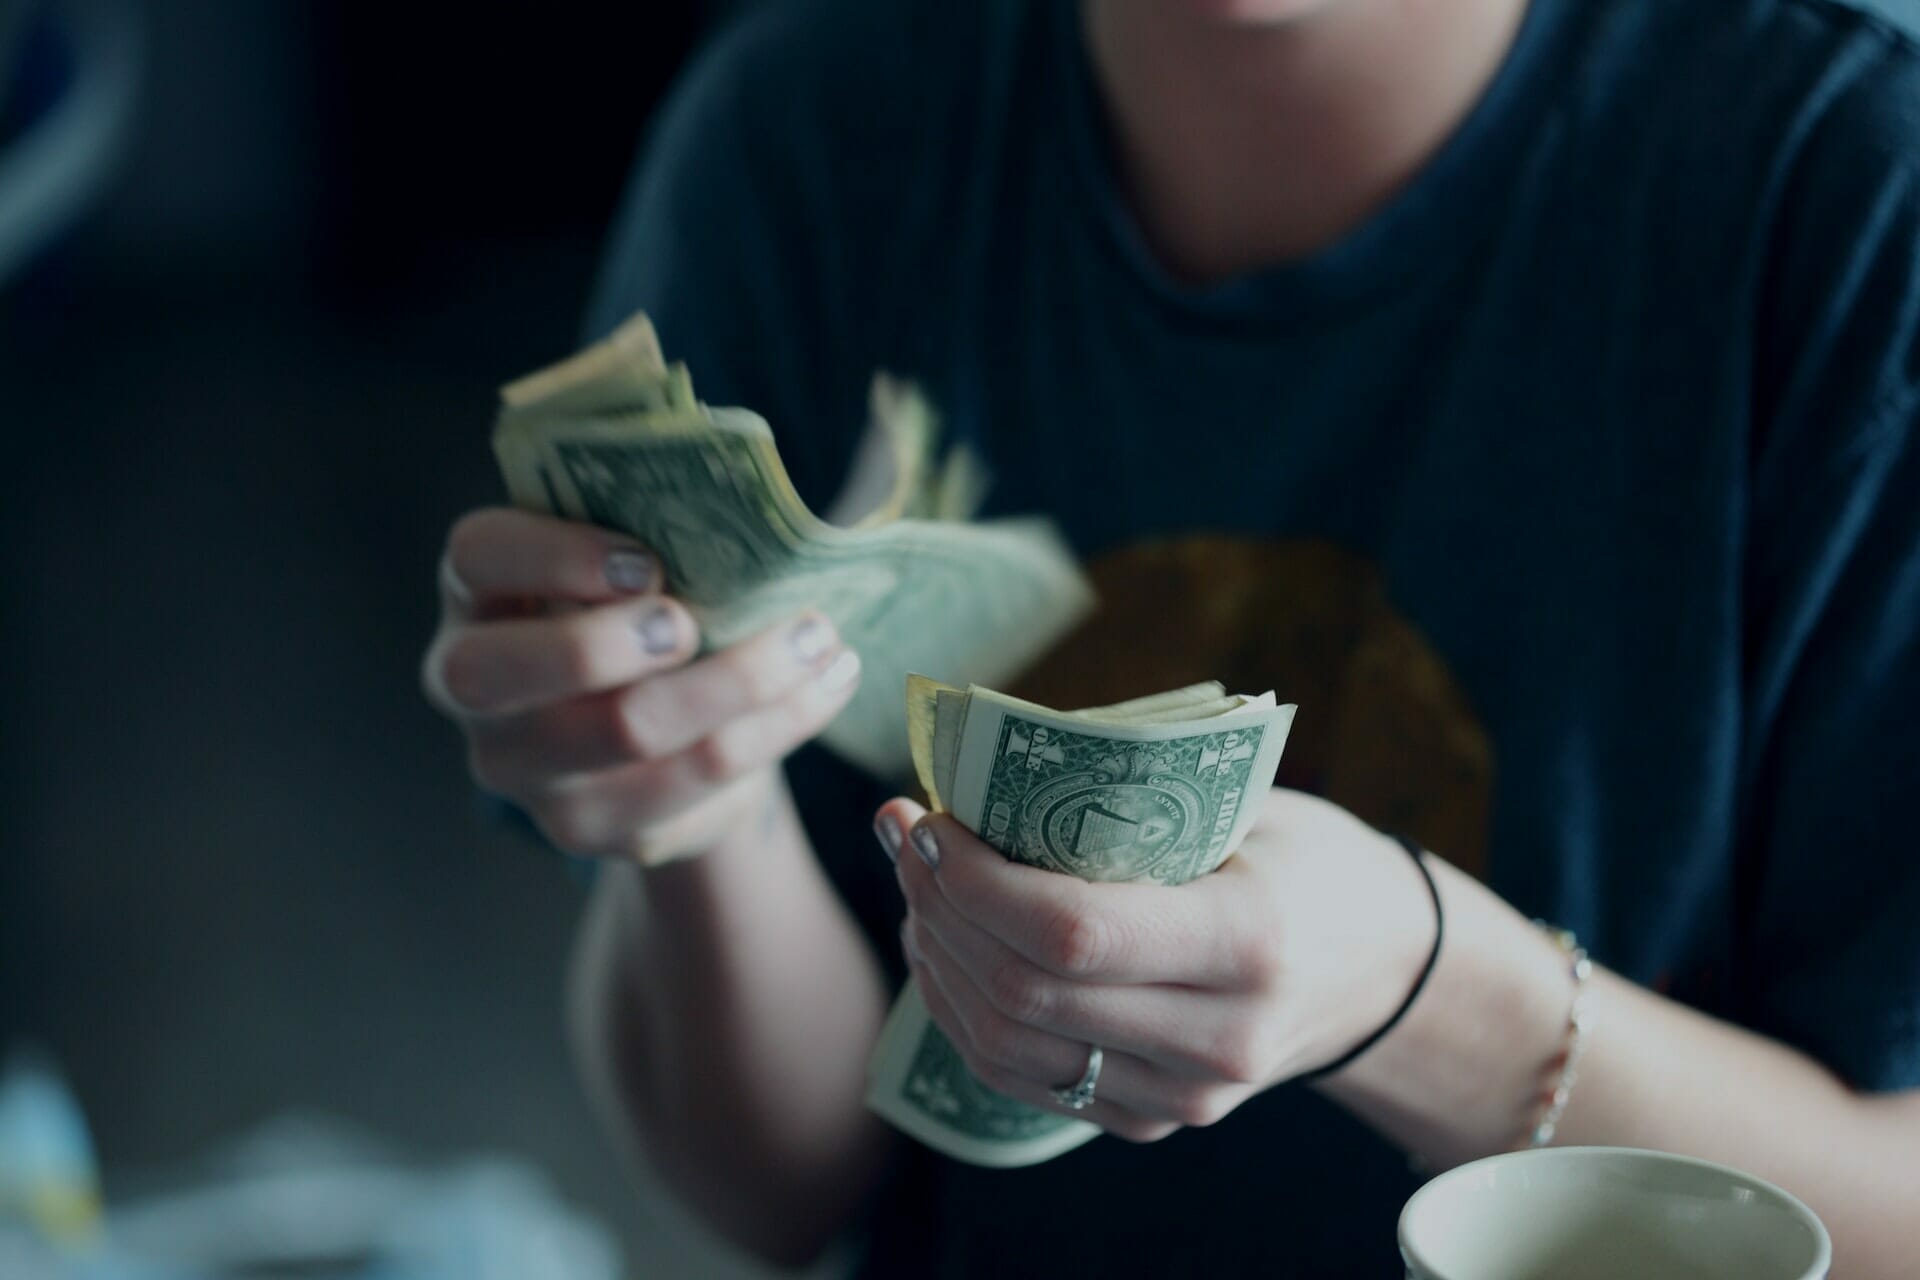 In this article, David Platt explores the question, "What Does the Bible Say About Giving?" The image for this picture of a man counting money.